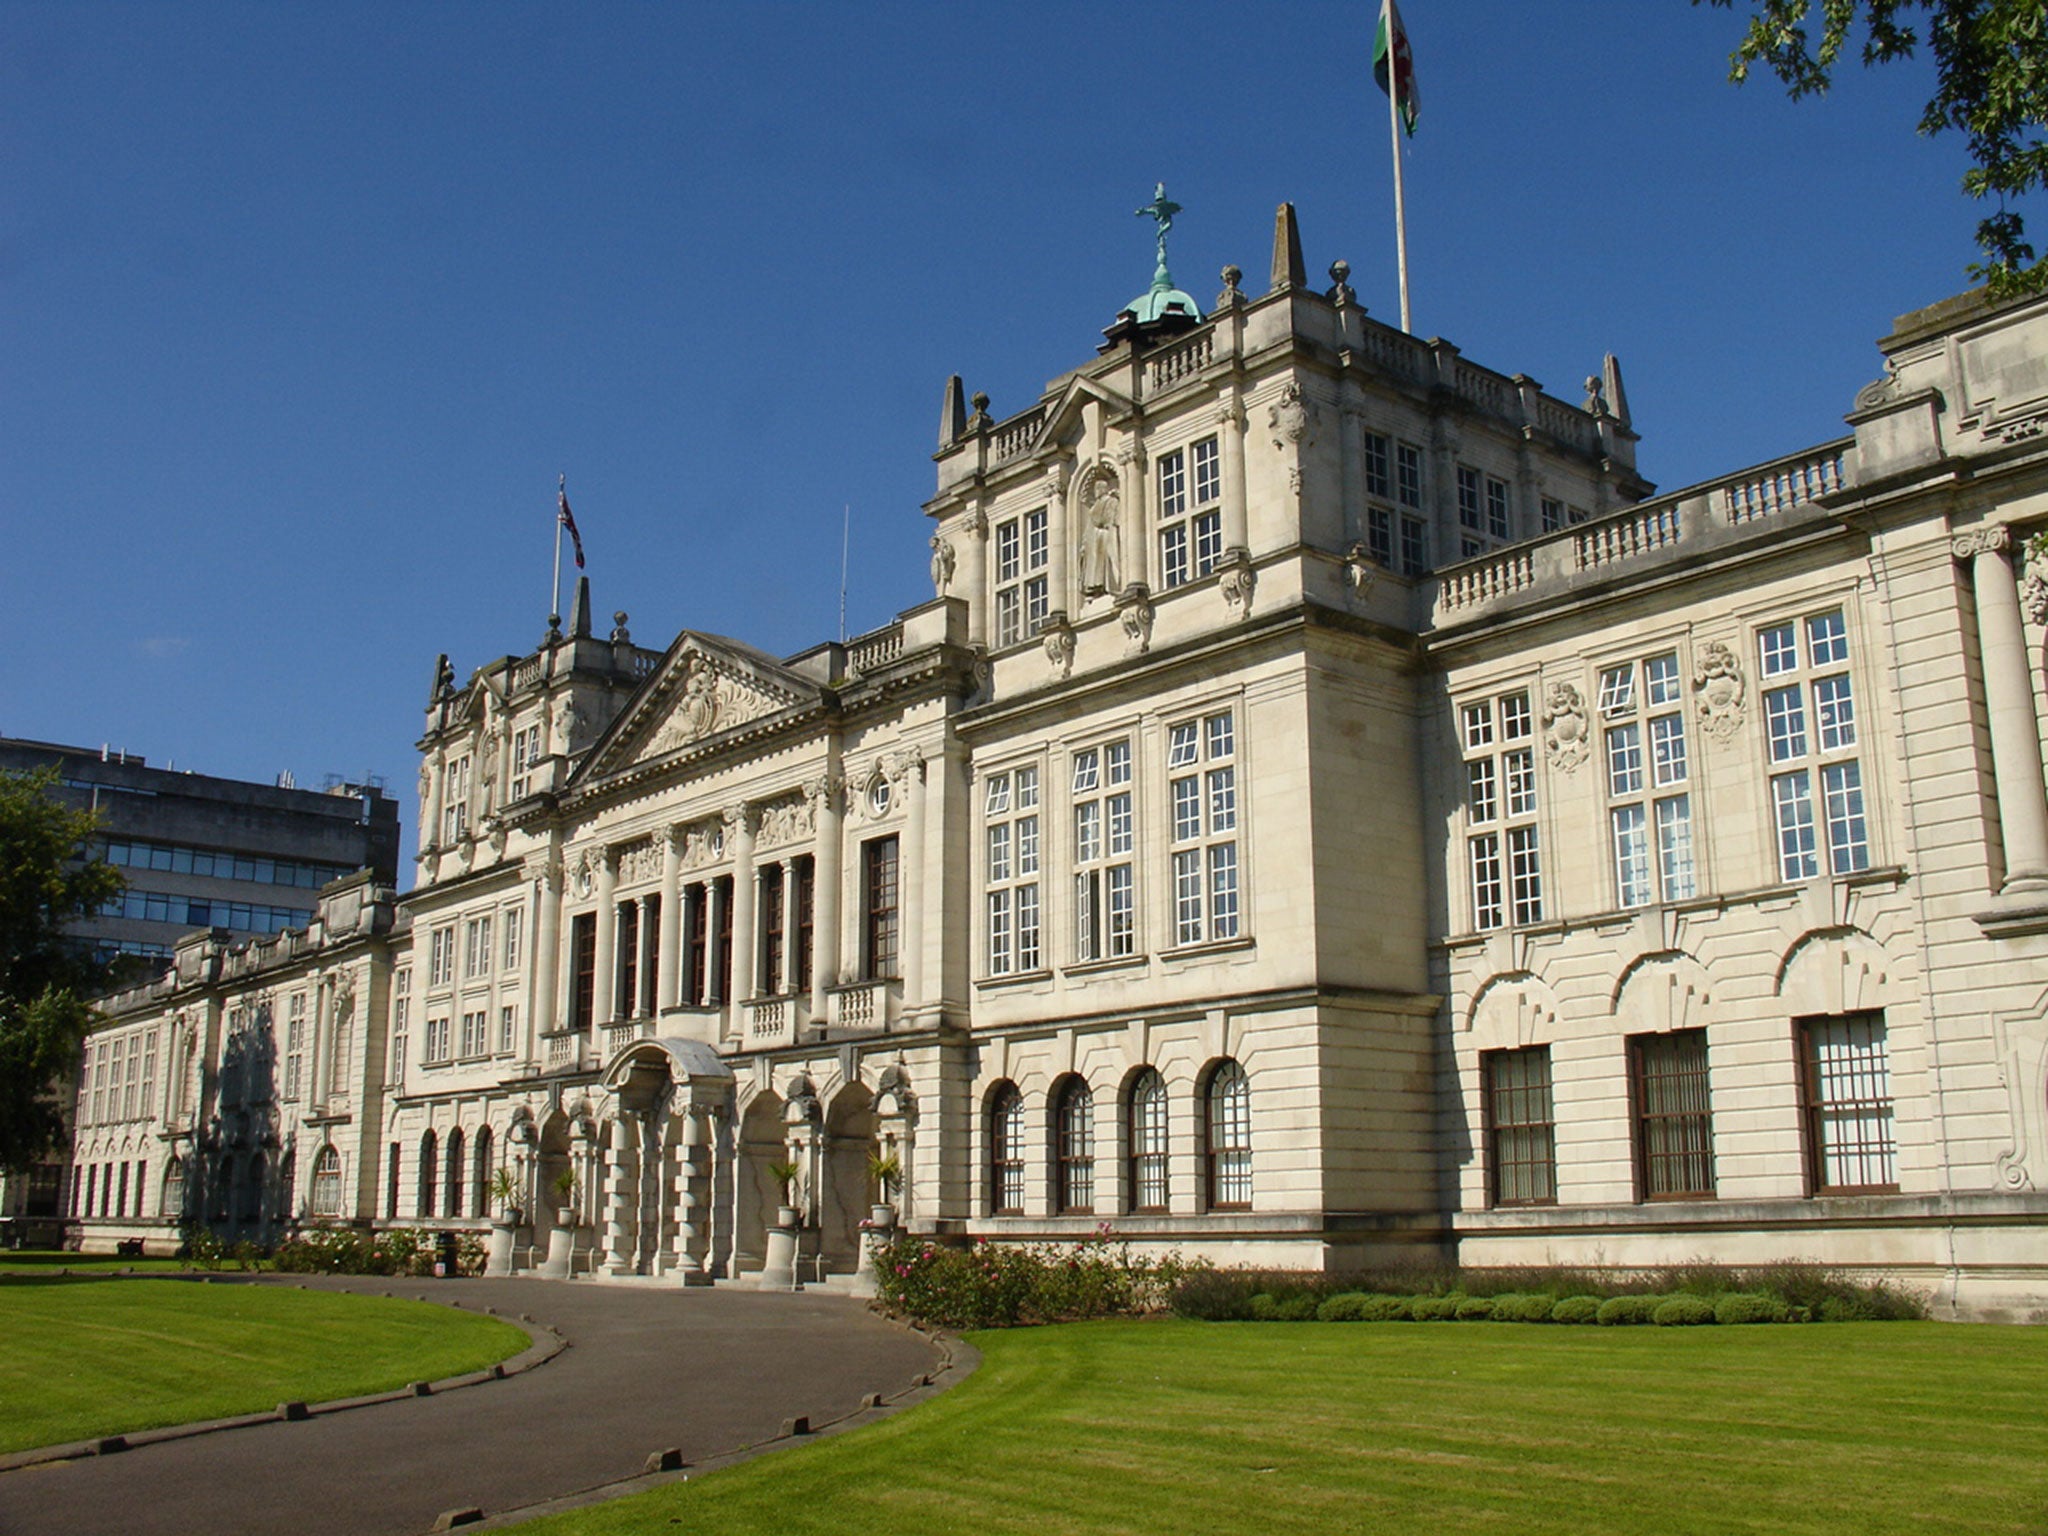 Cardiff University, pictured